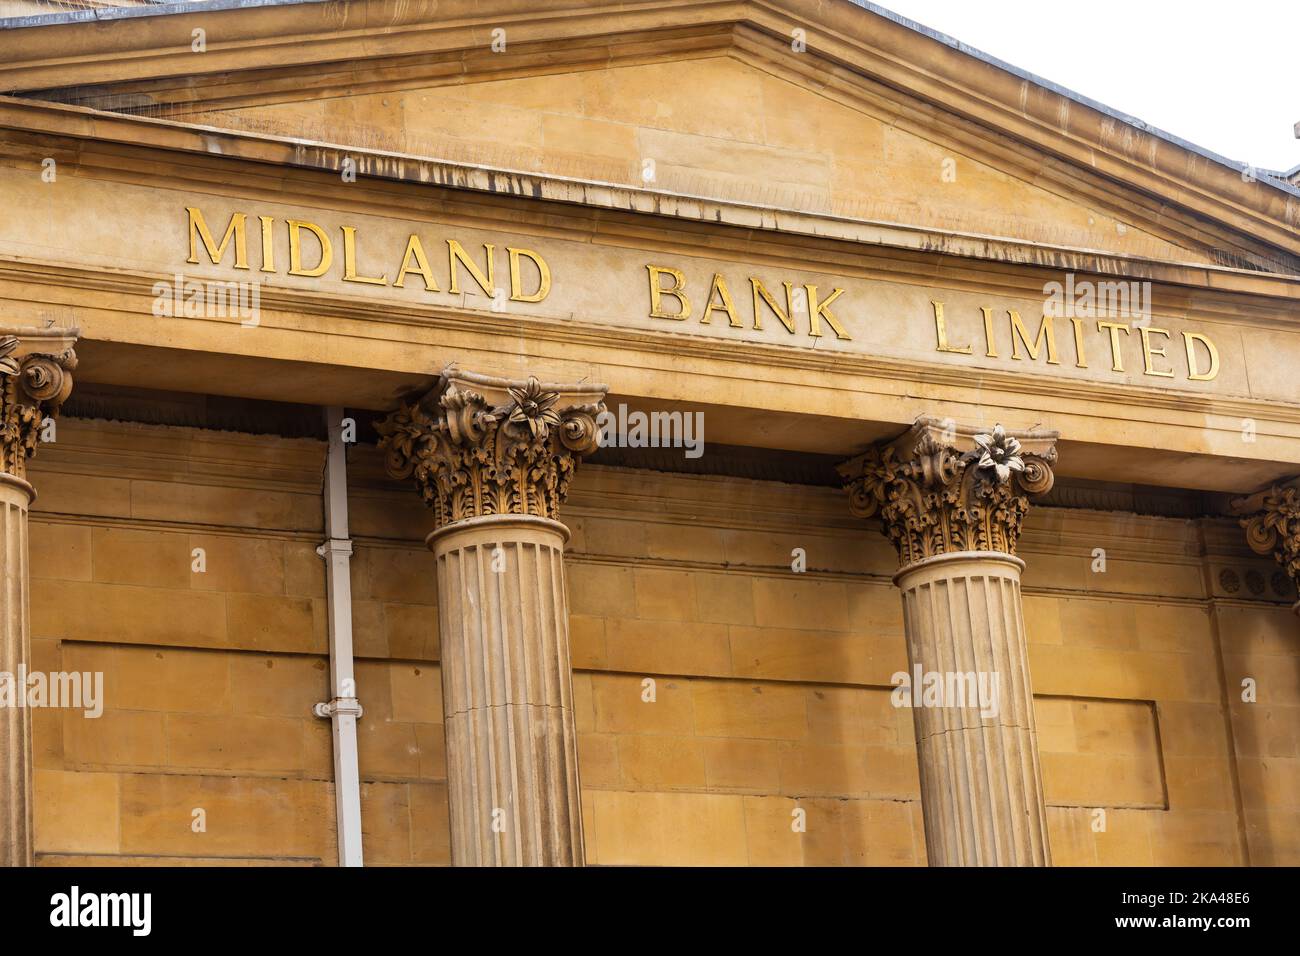 Midland Bank limited facade with Corinthian coloumns, pediment and capitals, Birmingham, Warwickshire, West Midlands, England.  Neo classical architec Stock Photo